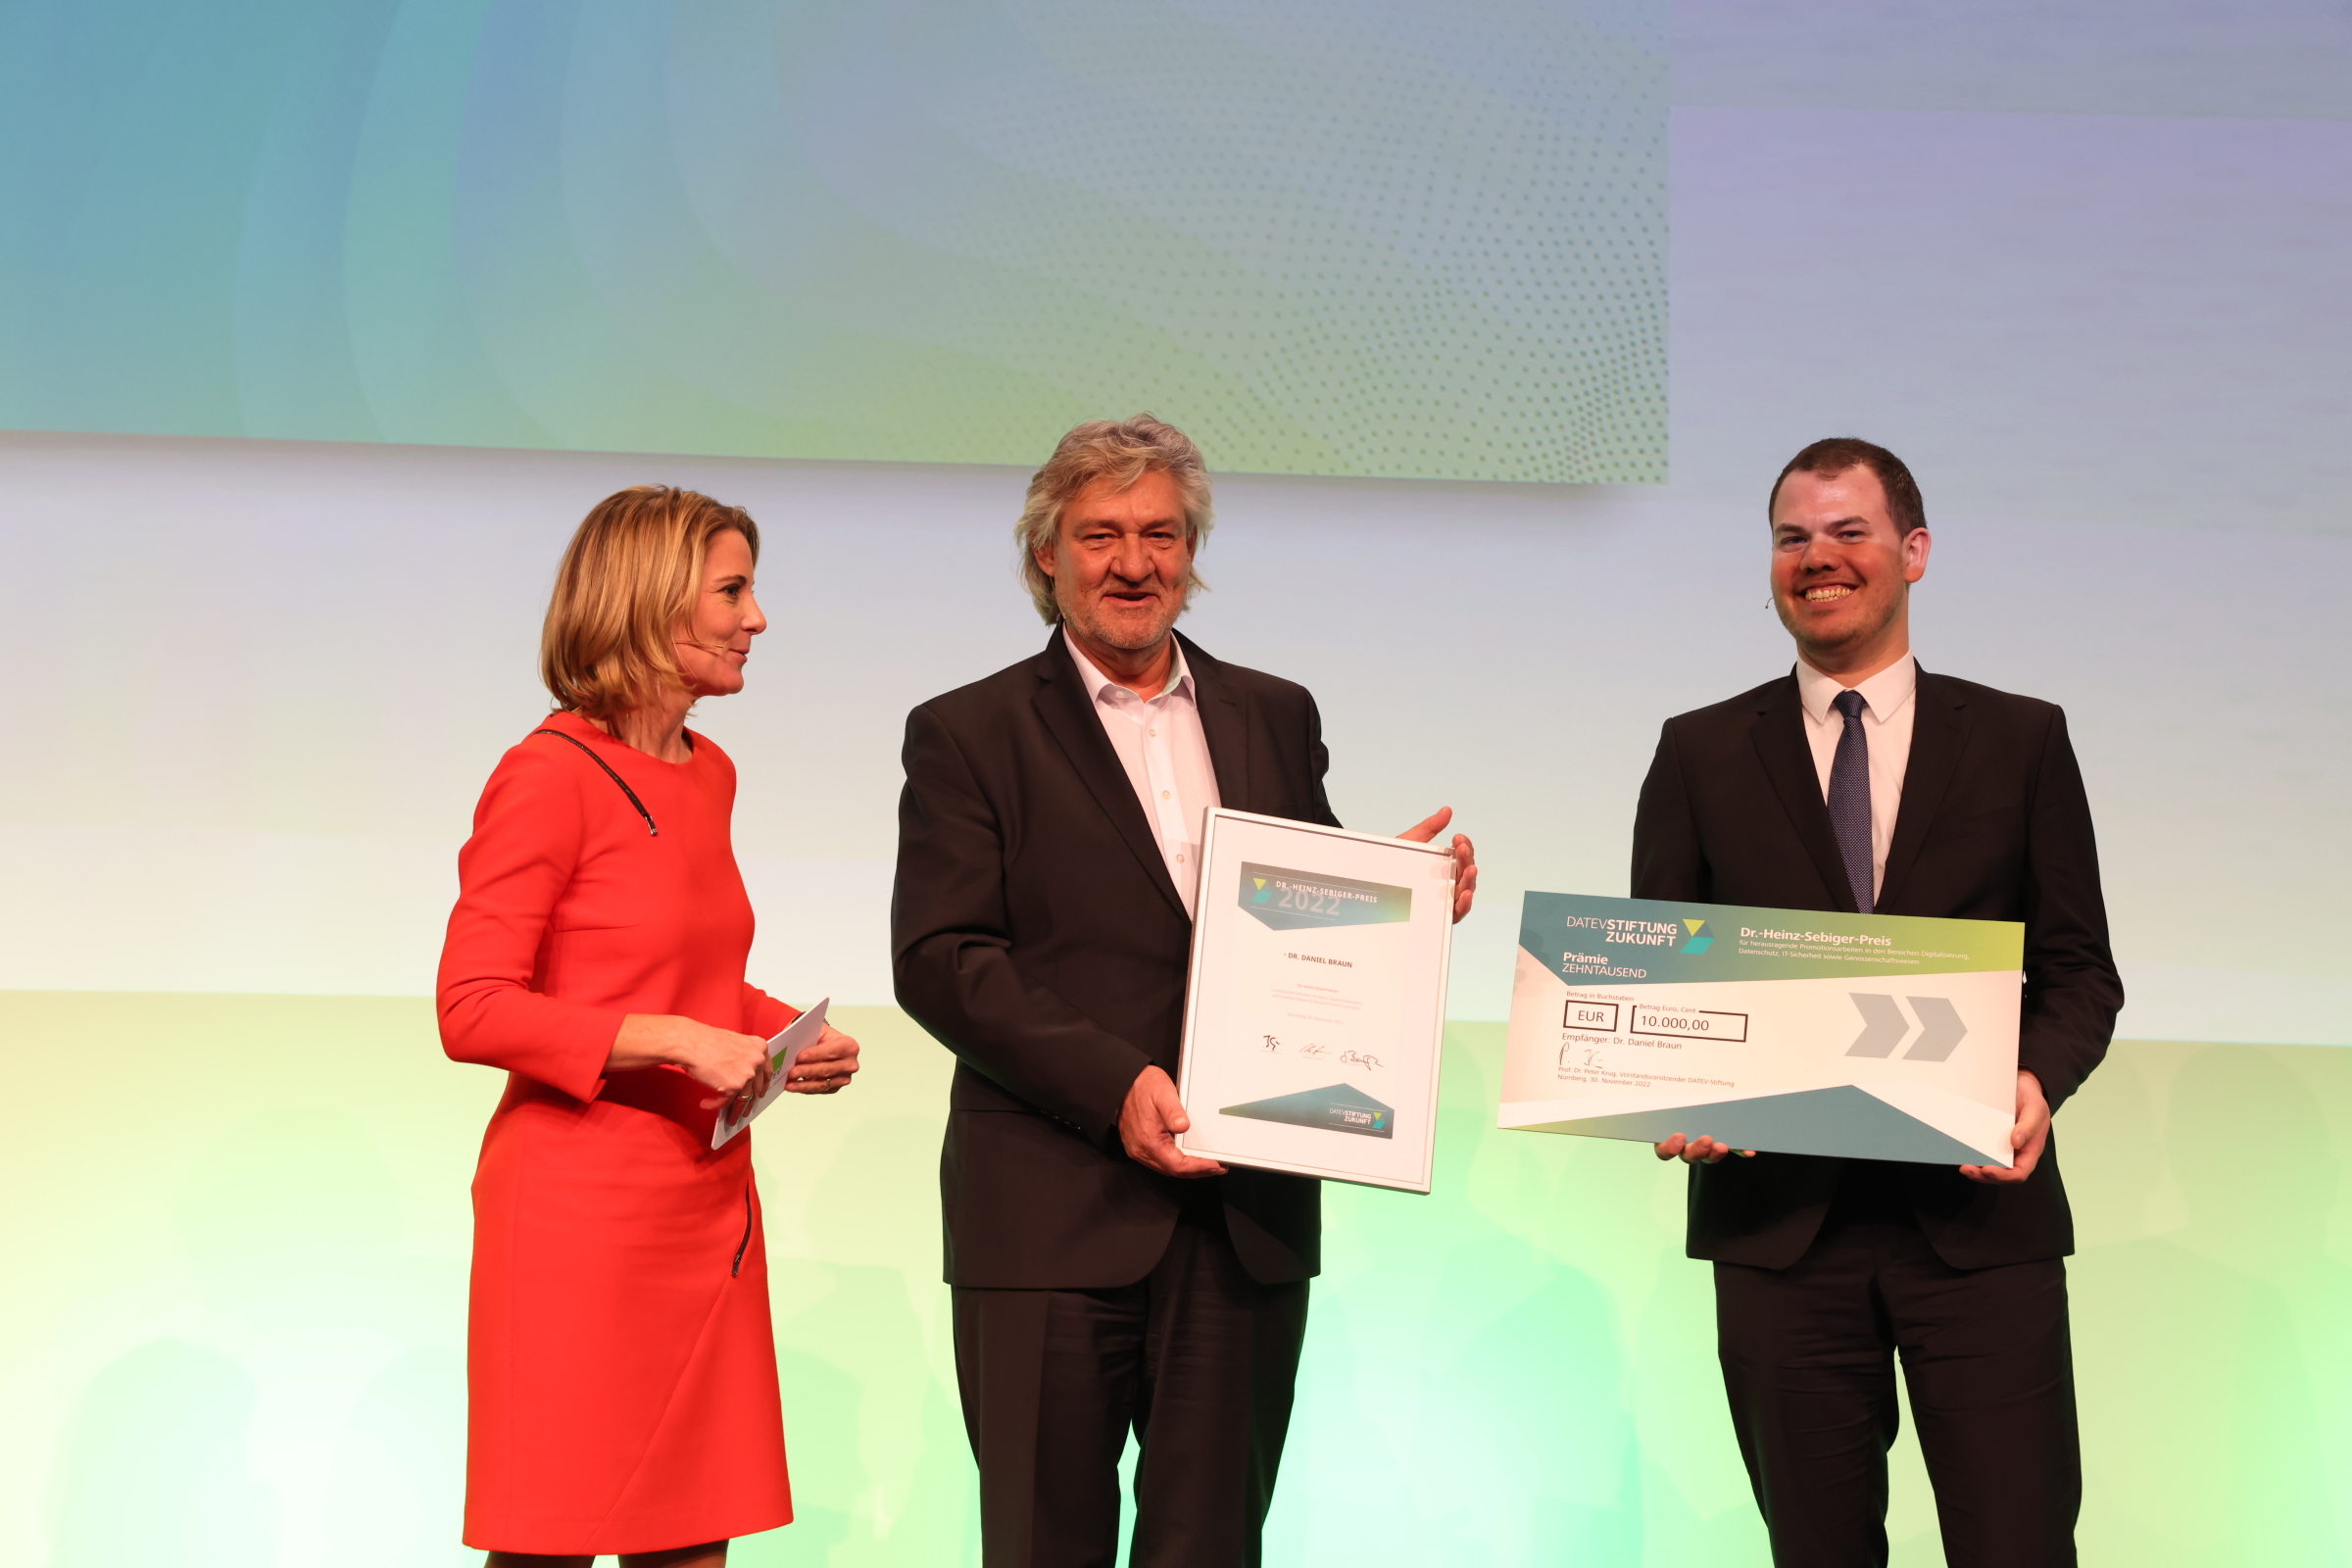 And the winner is Dr. Daniel Braun - DATEV-Stiftung